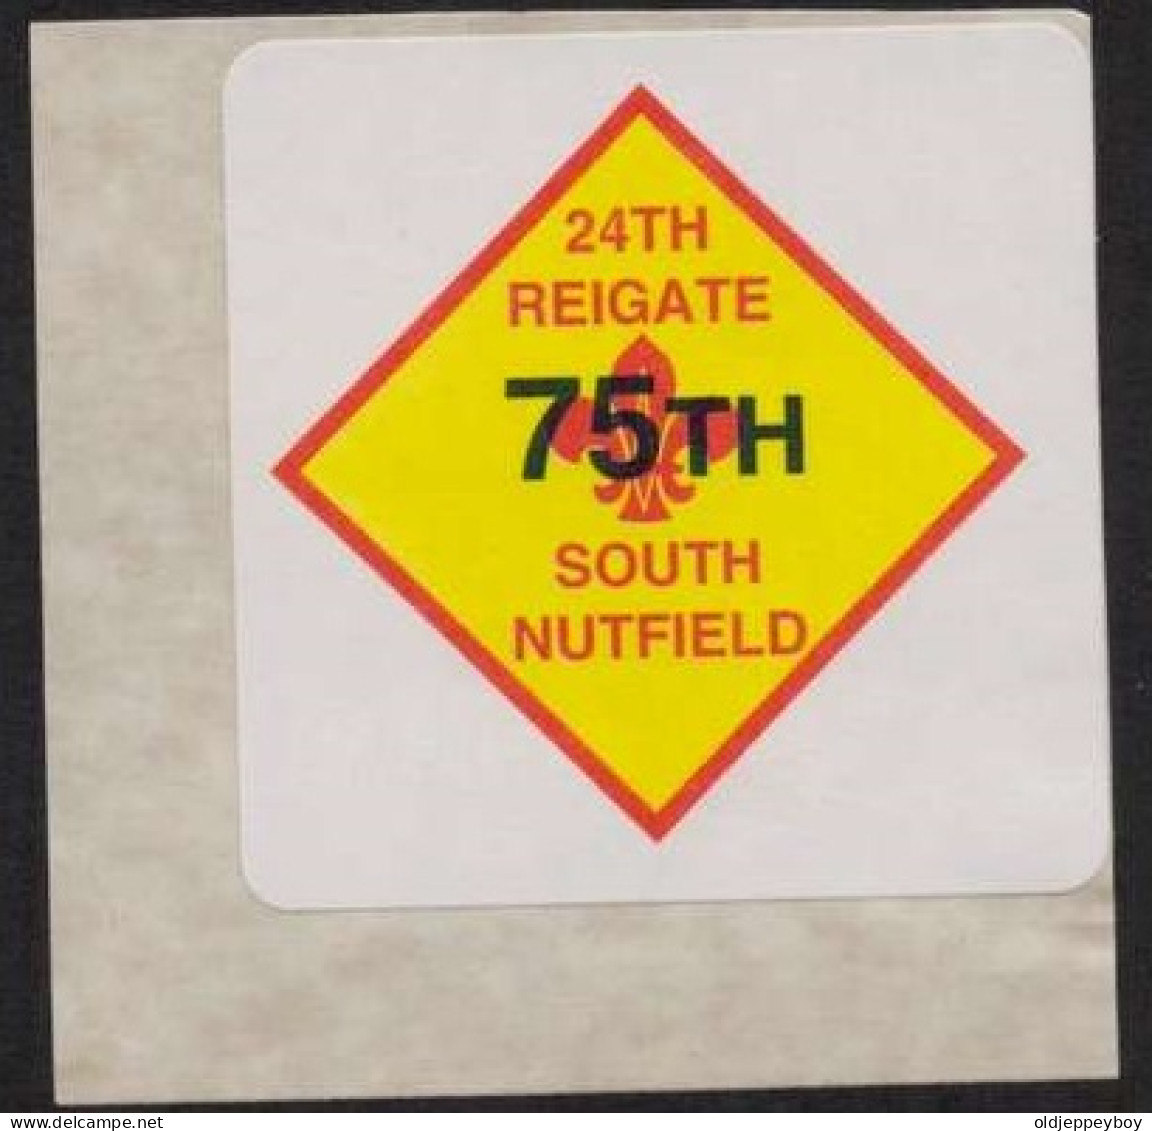 MNH**  75 Th South Nutfield 24TH REIGATE VIGNETTE SCOUTS POSTER STAMP  Pfadfinder CINDERELLA SCOUTING SCOUTISMO - Unused Stamps